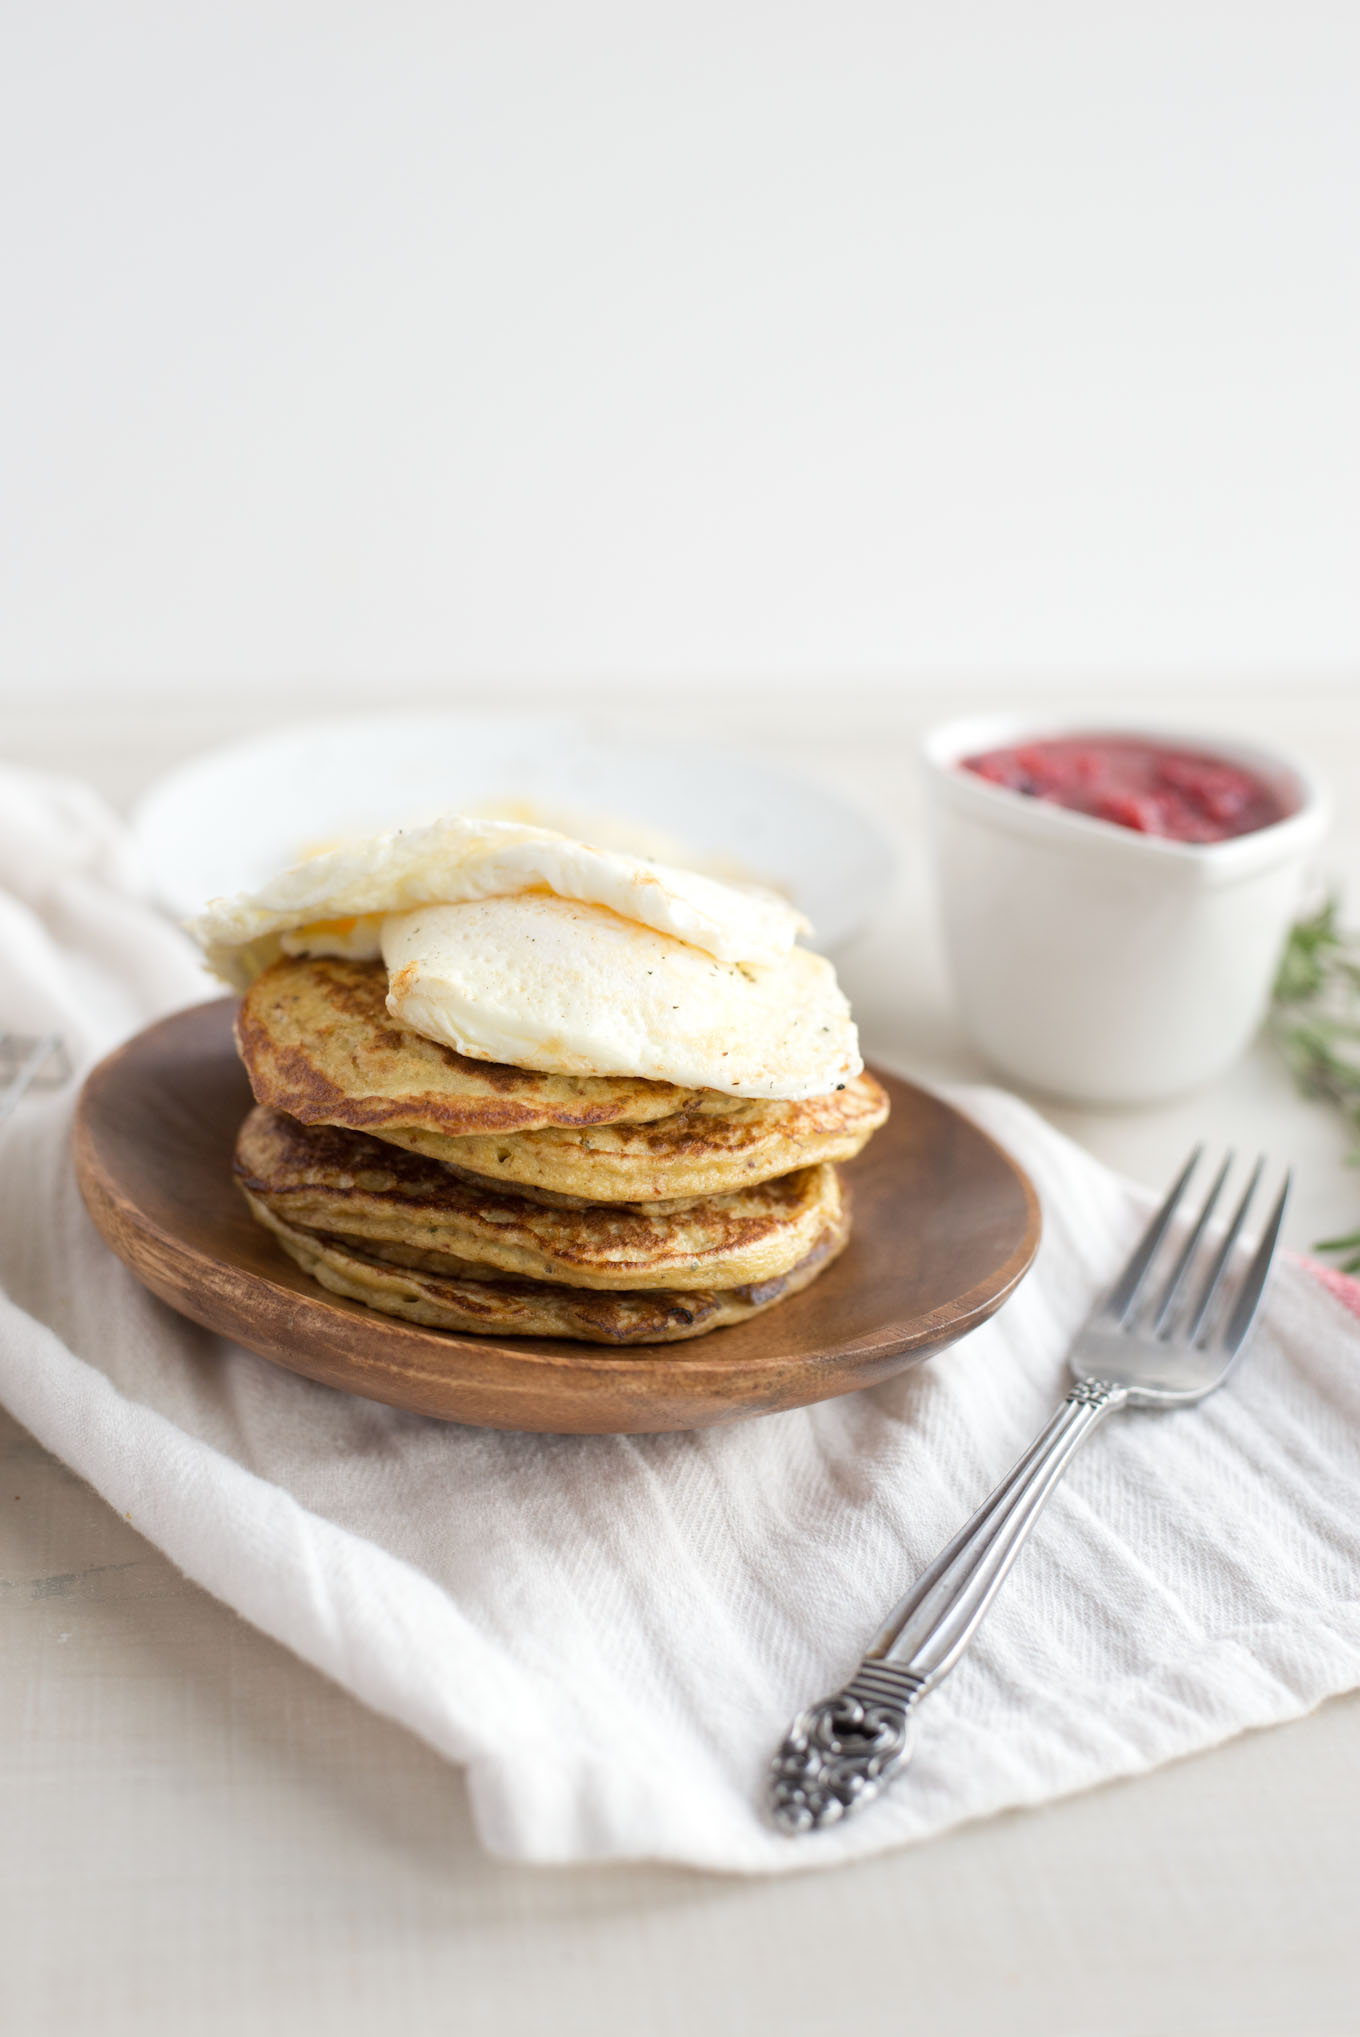 Quick 5 minute blender pancakes with bacon and cheddar. Need I say more?